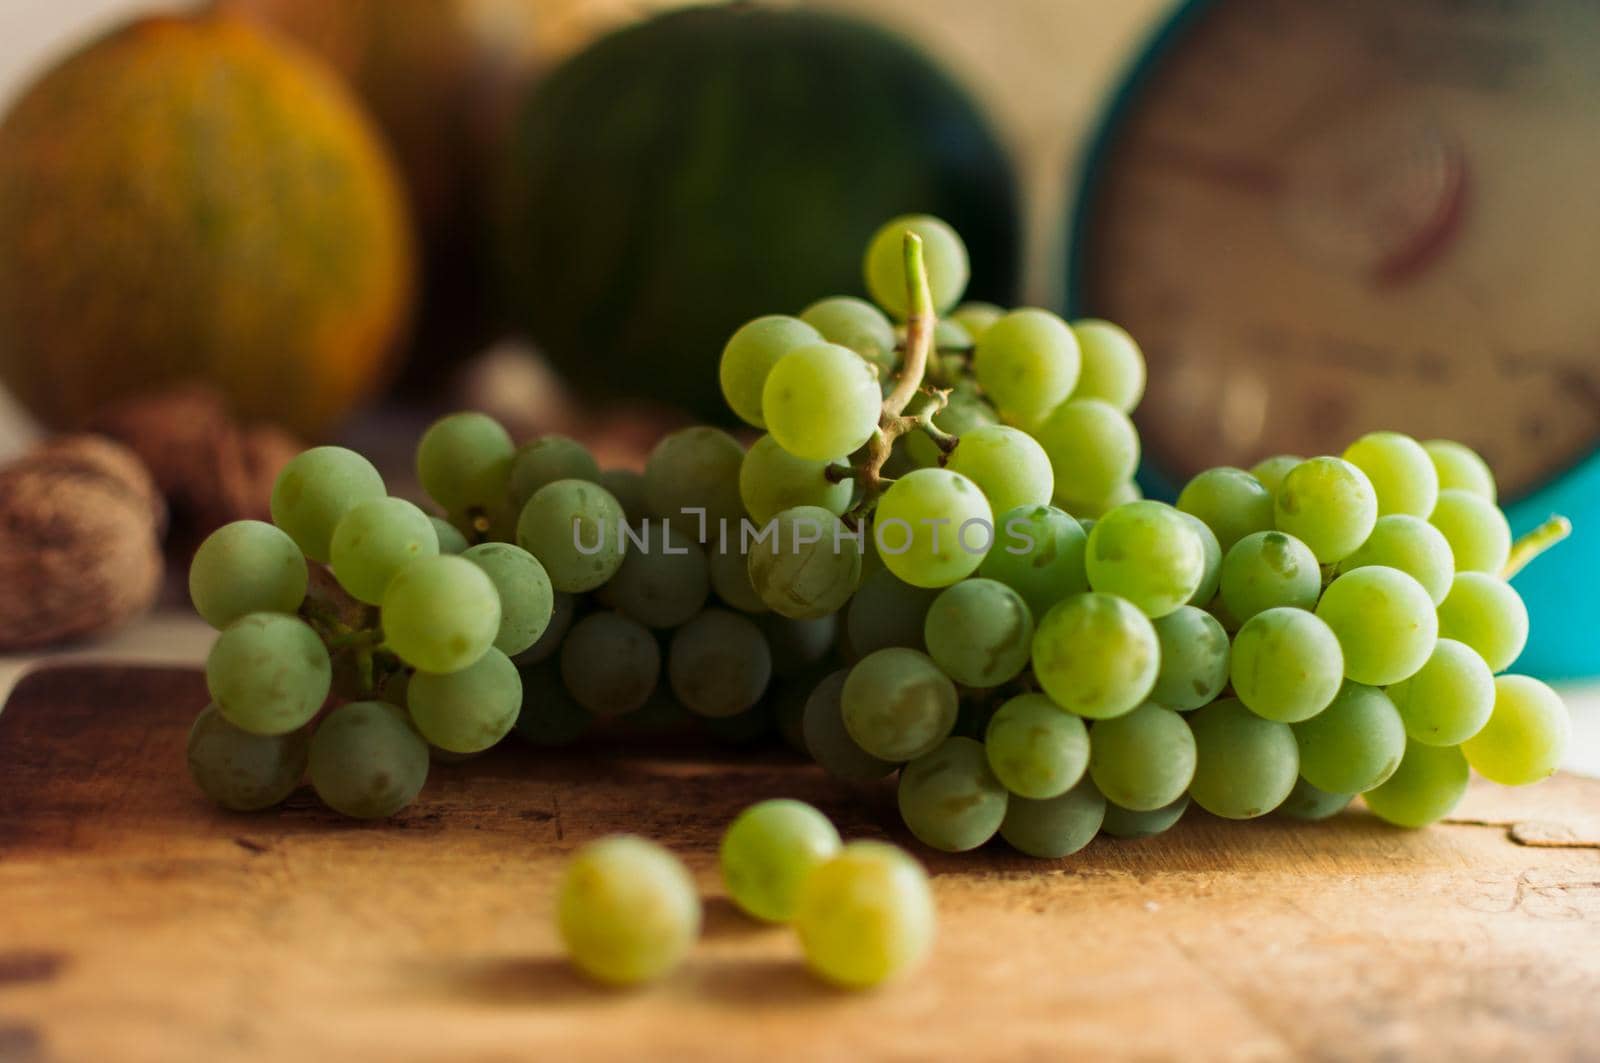 Autumn still life.Green grapes lie on wooden board.In the background are pumpkins,walnuts and scales.Autumn harvest concept.Happy Thanksgiving.Selective focus.Horizontal orientation.